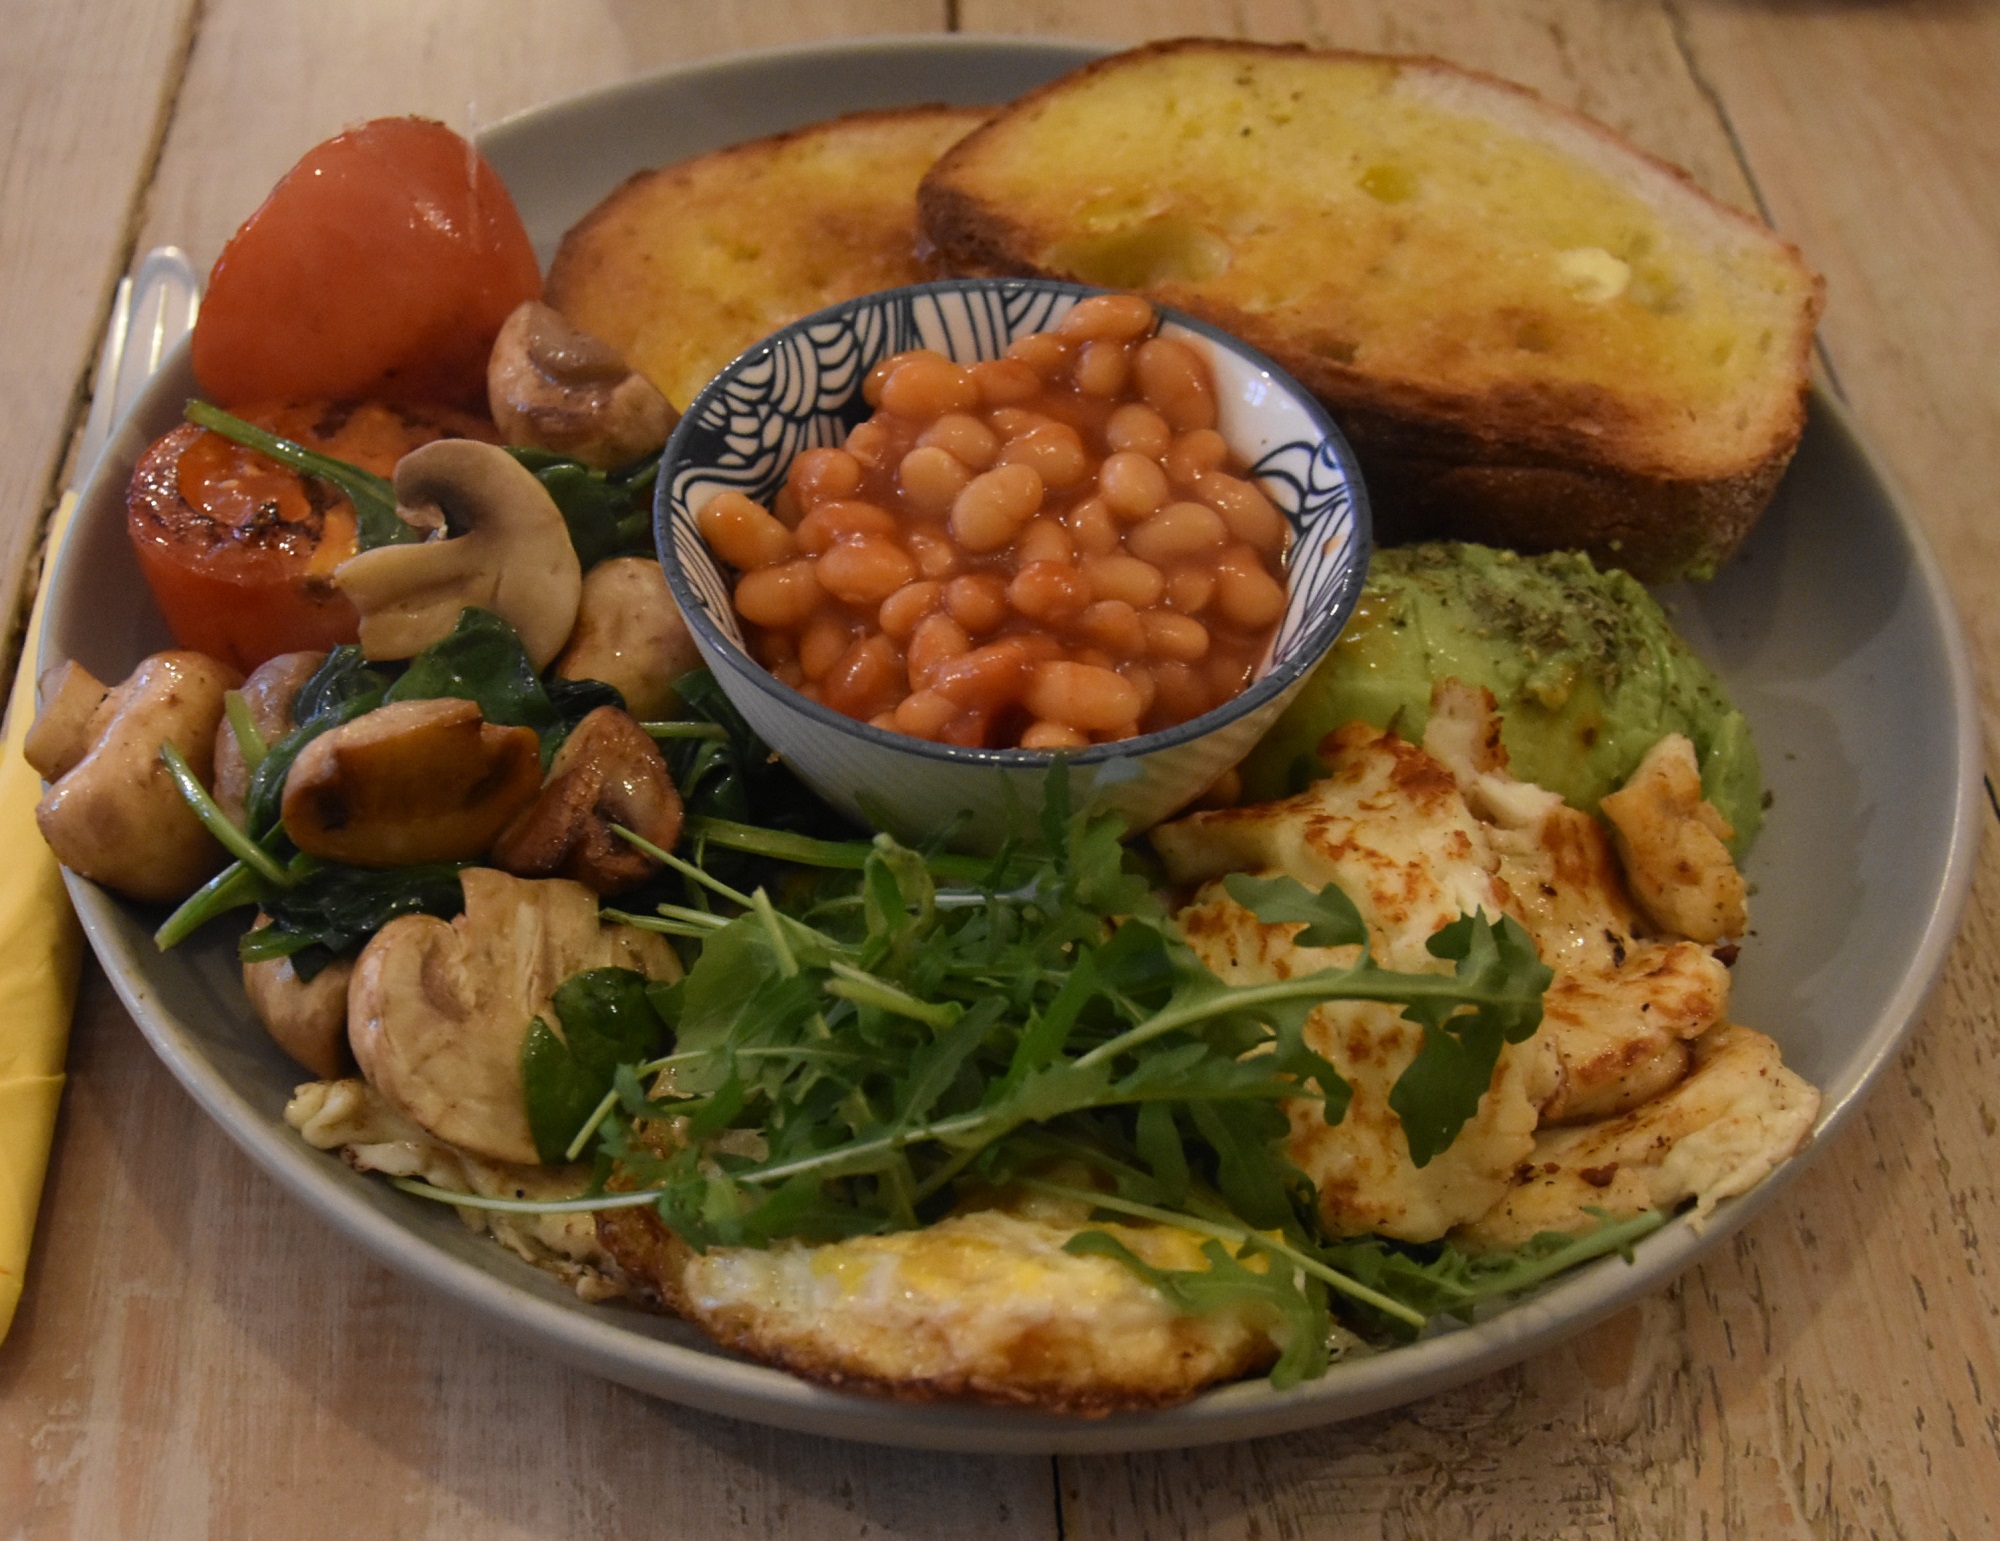 My awesome veggie breakfast which I had at Little Yellow Pig in Nantwich. Arranged around a pot of baked beans in the centre are avocado, halloumu, a pair of fried eggs, spinach, mushrooms, tomatoes and two slices of toast!